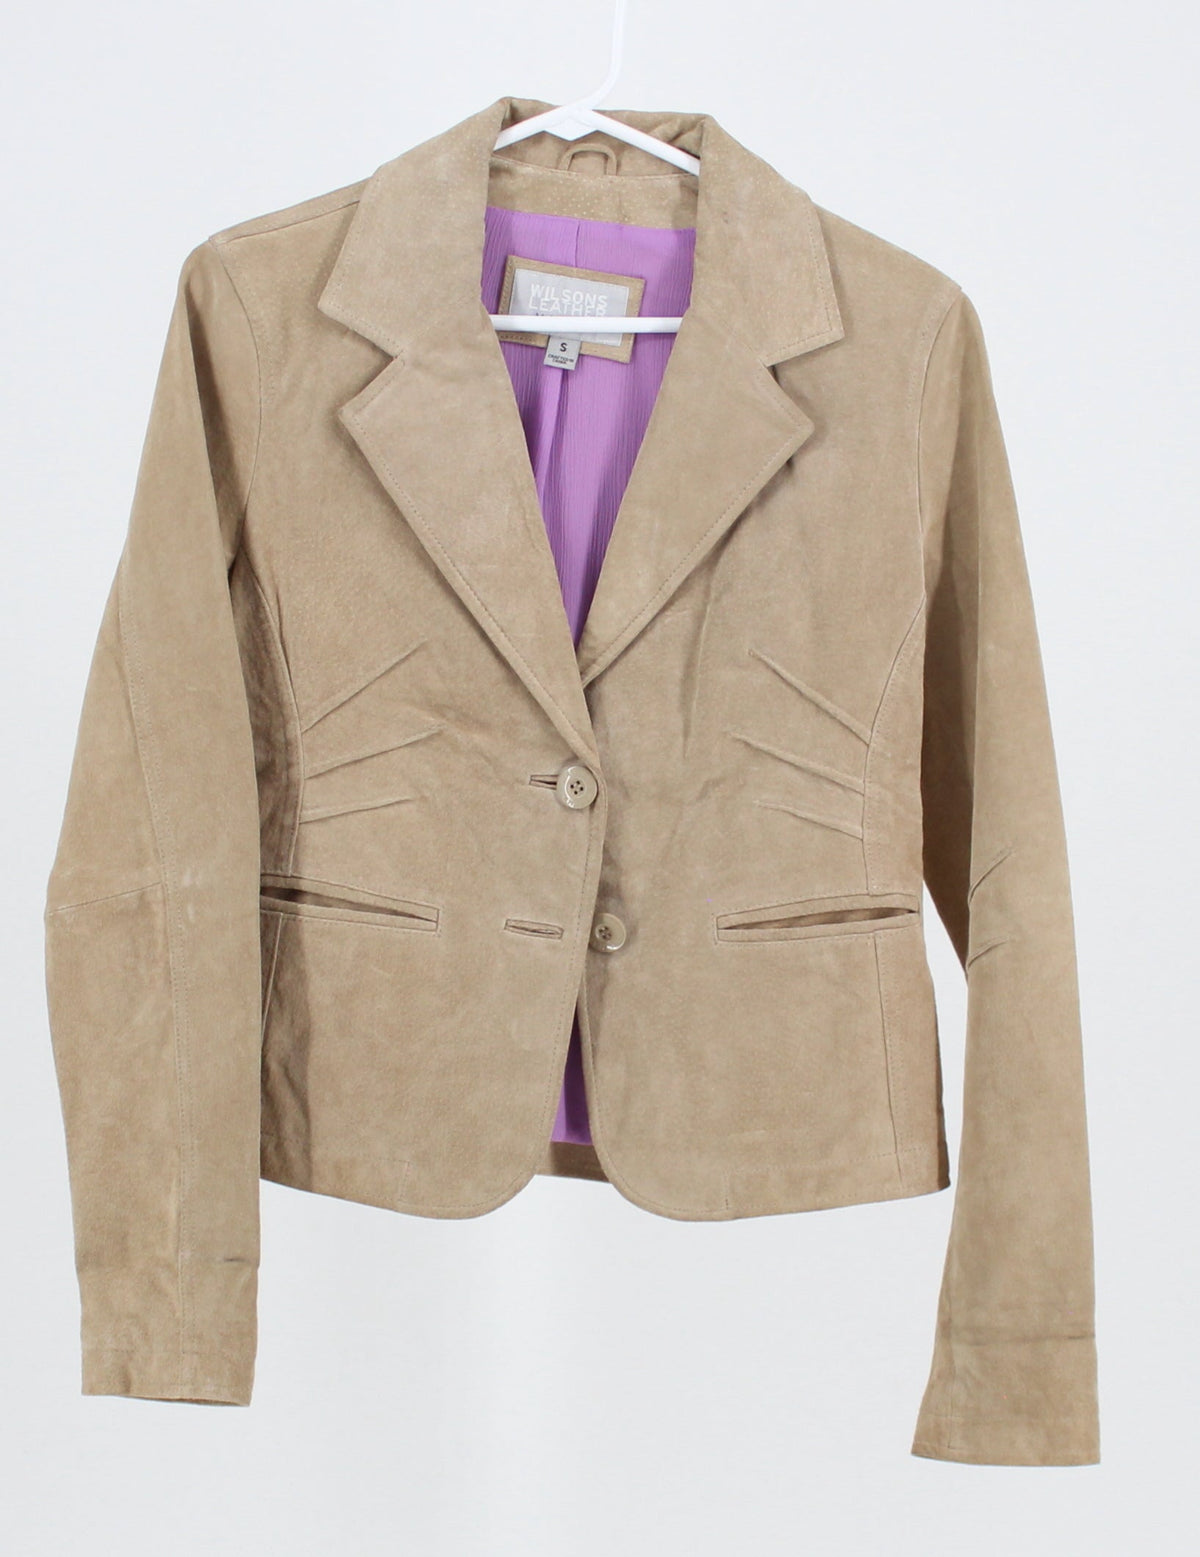 Wilsons Leather Beige Leather Jacket